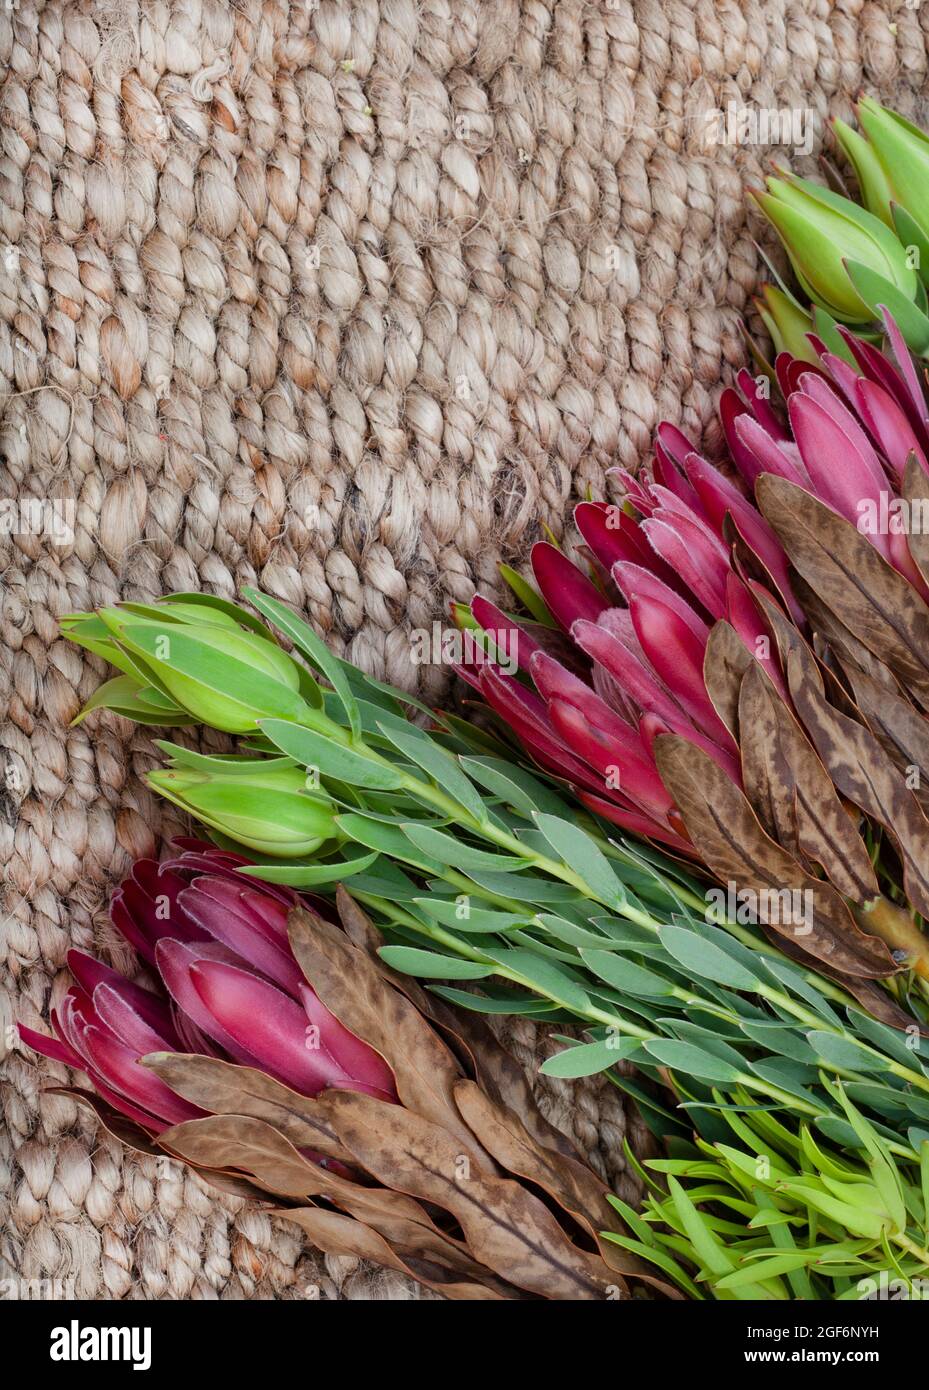 South African protea flowers on a rustic surface Stock Photo